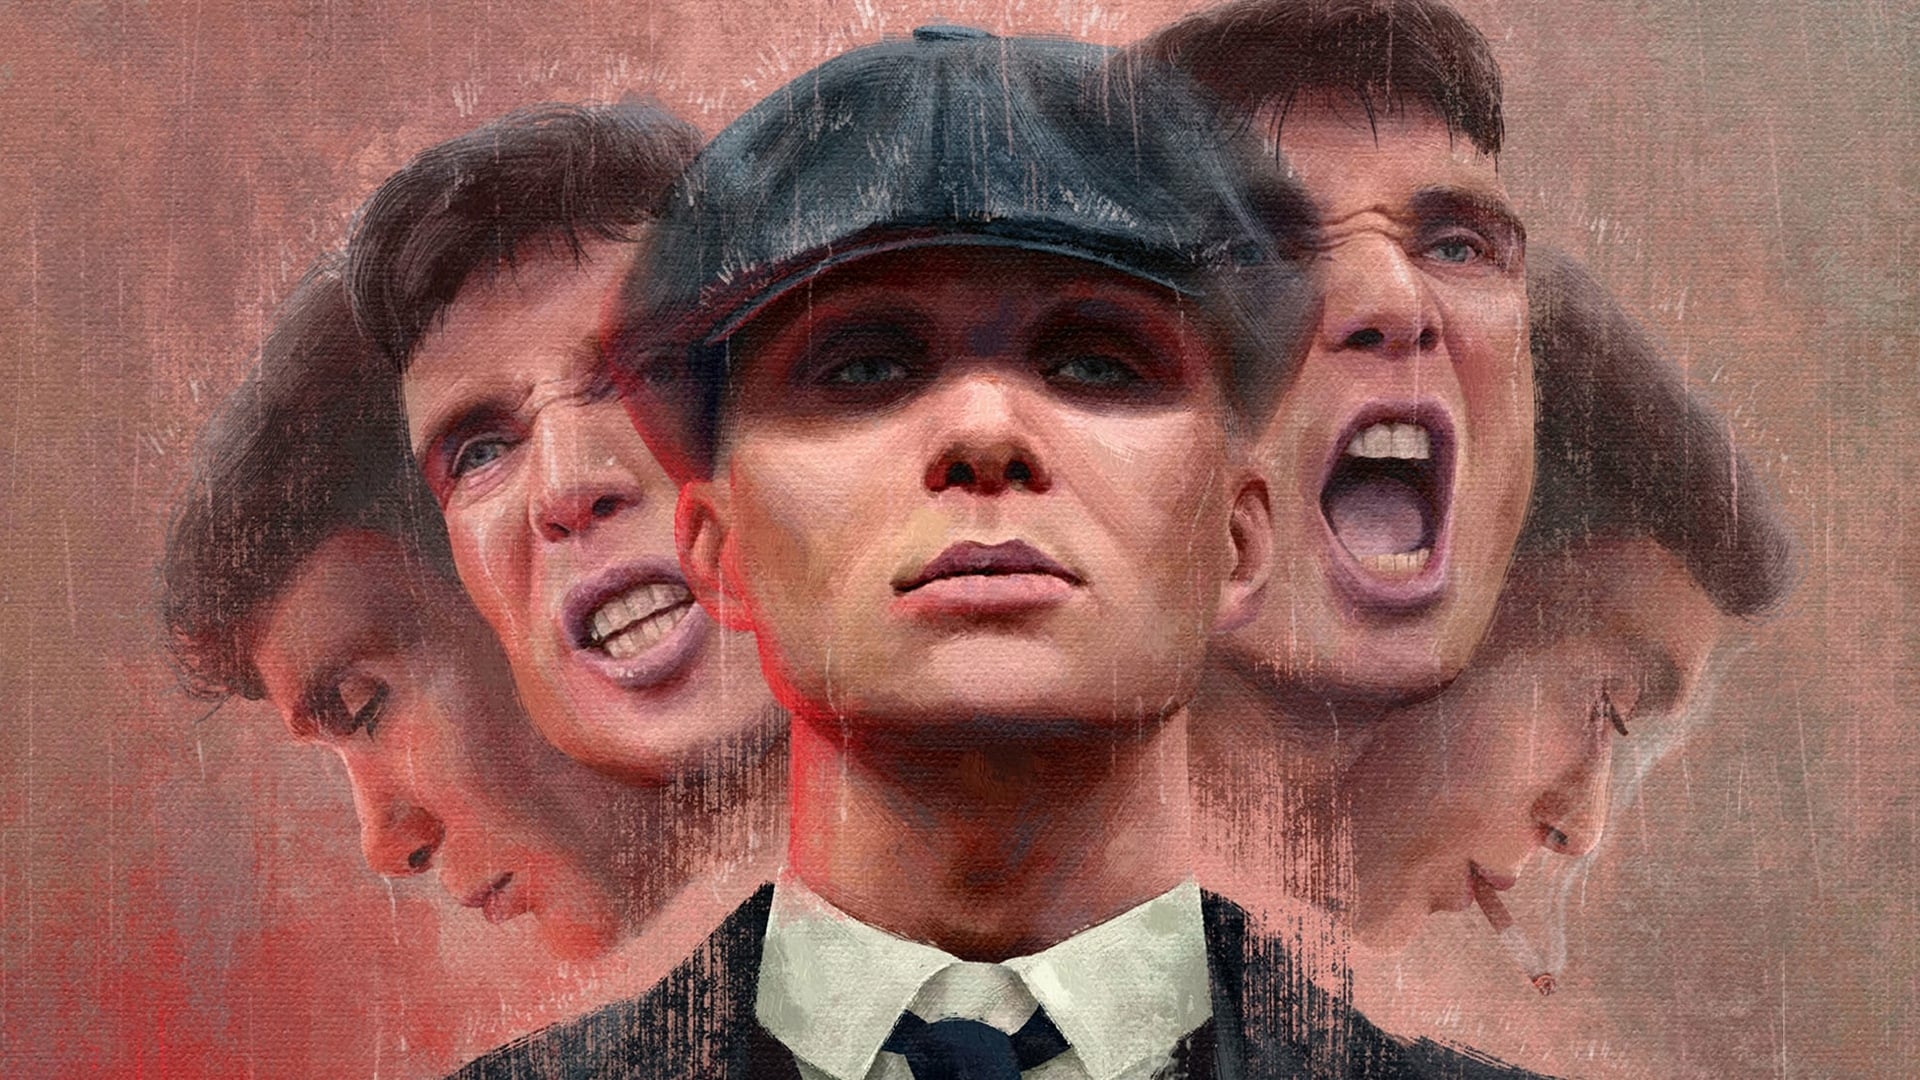 Peaky Blinders Season 6 Wallpaper, HD TV Series 4K Wallpapers, Images,  Photos and Background - Wallpapers Den